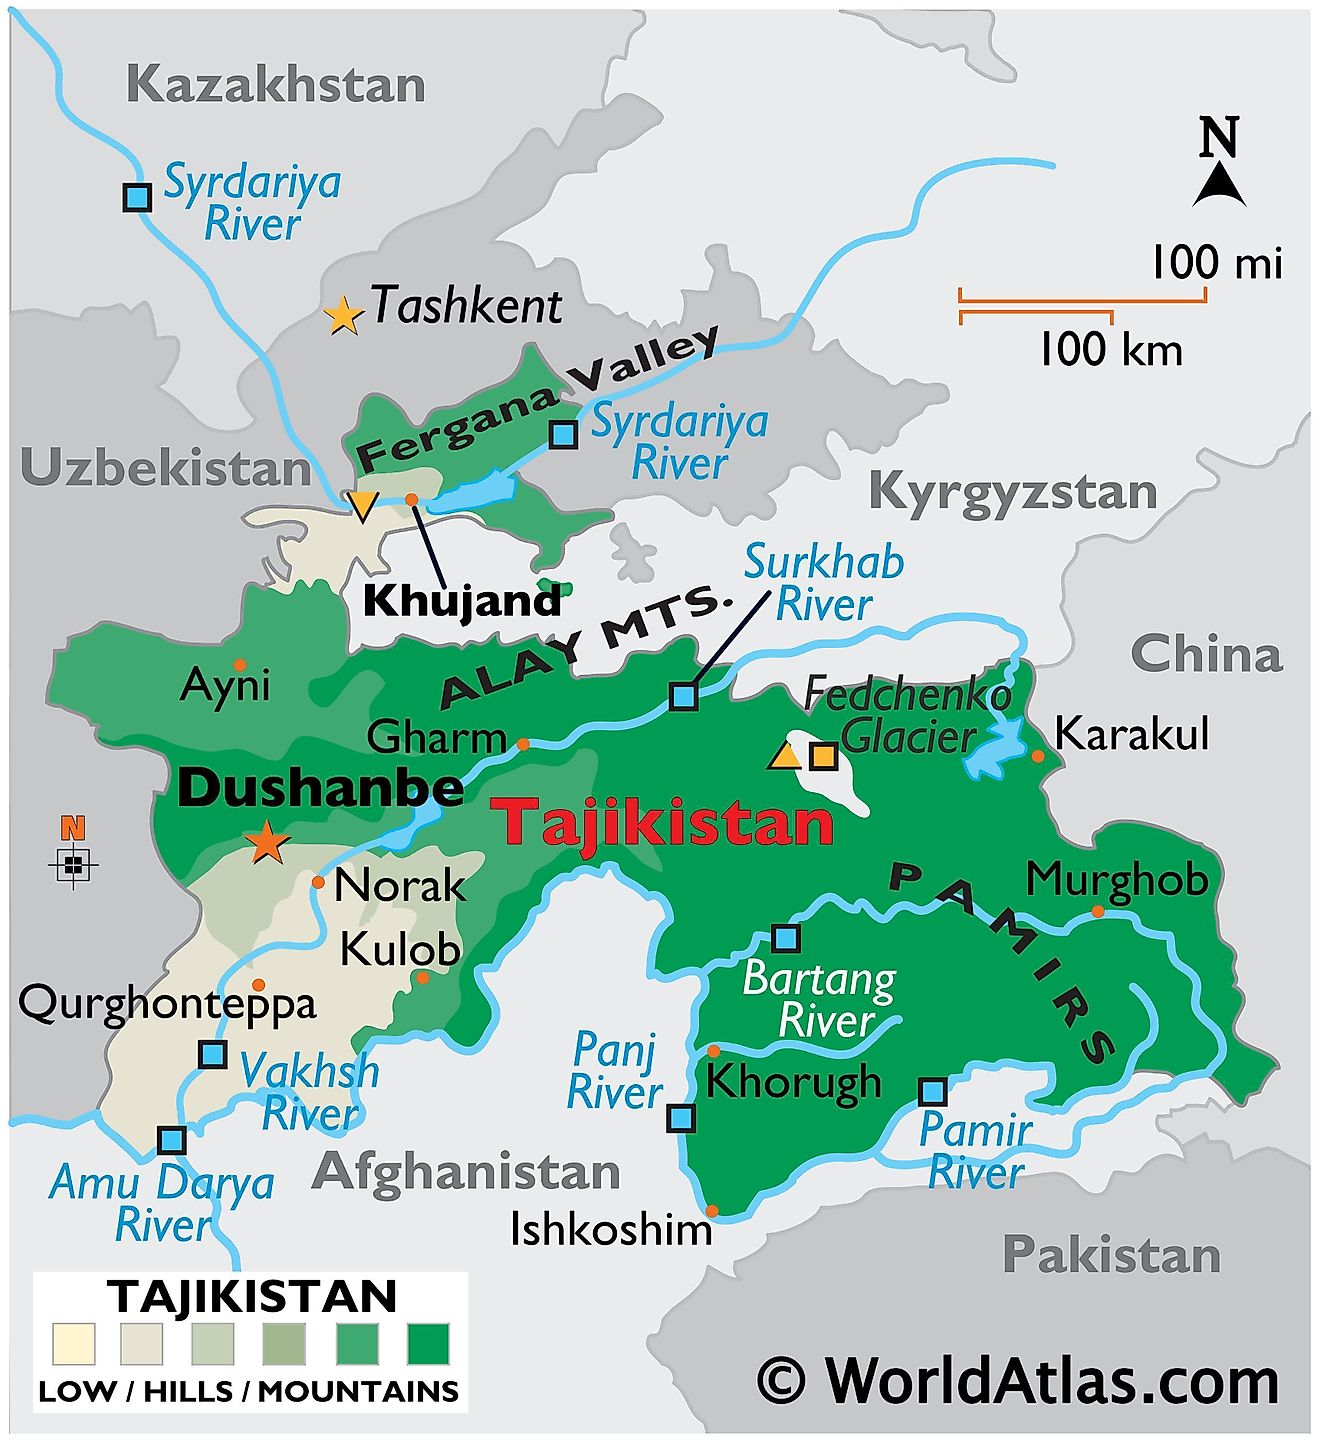 Phyiscal Map of Tajikistan with state boundaries, relief, major mountain ranges, rivers, Fedchenko Glacier, Fergana Valley, extreme points, etc.